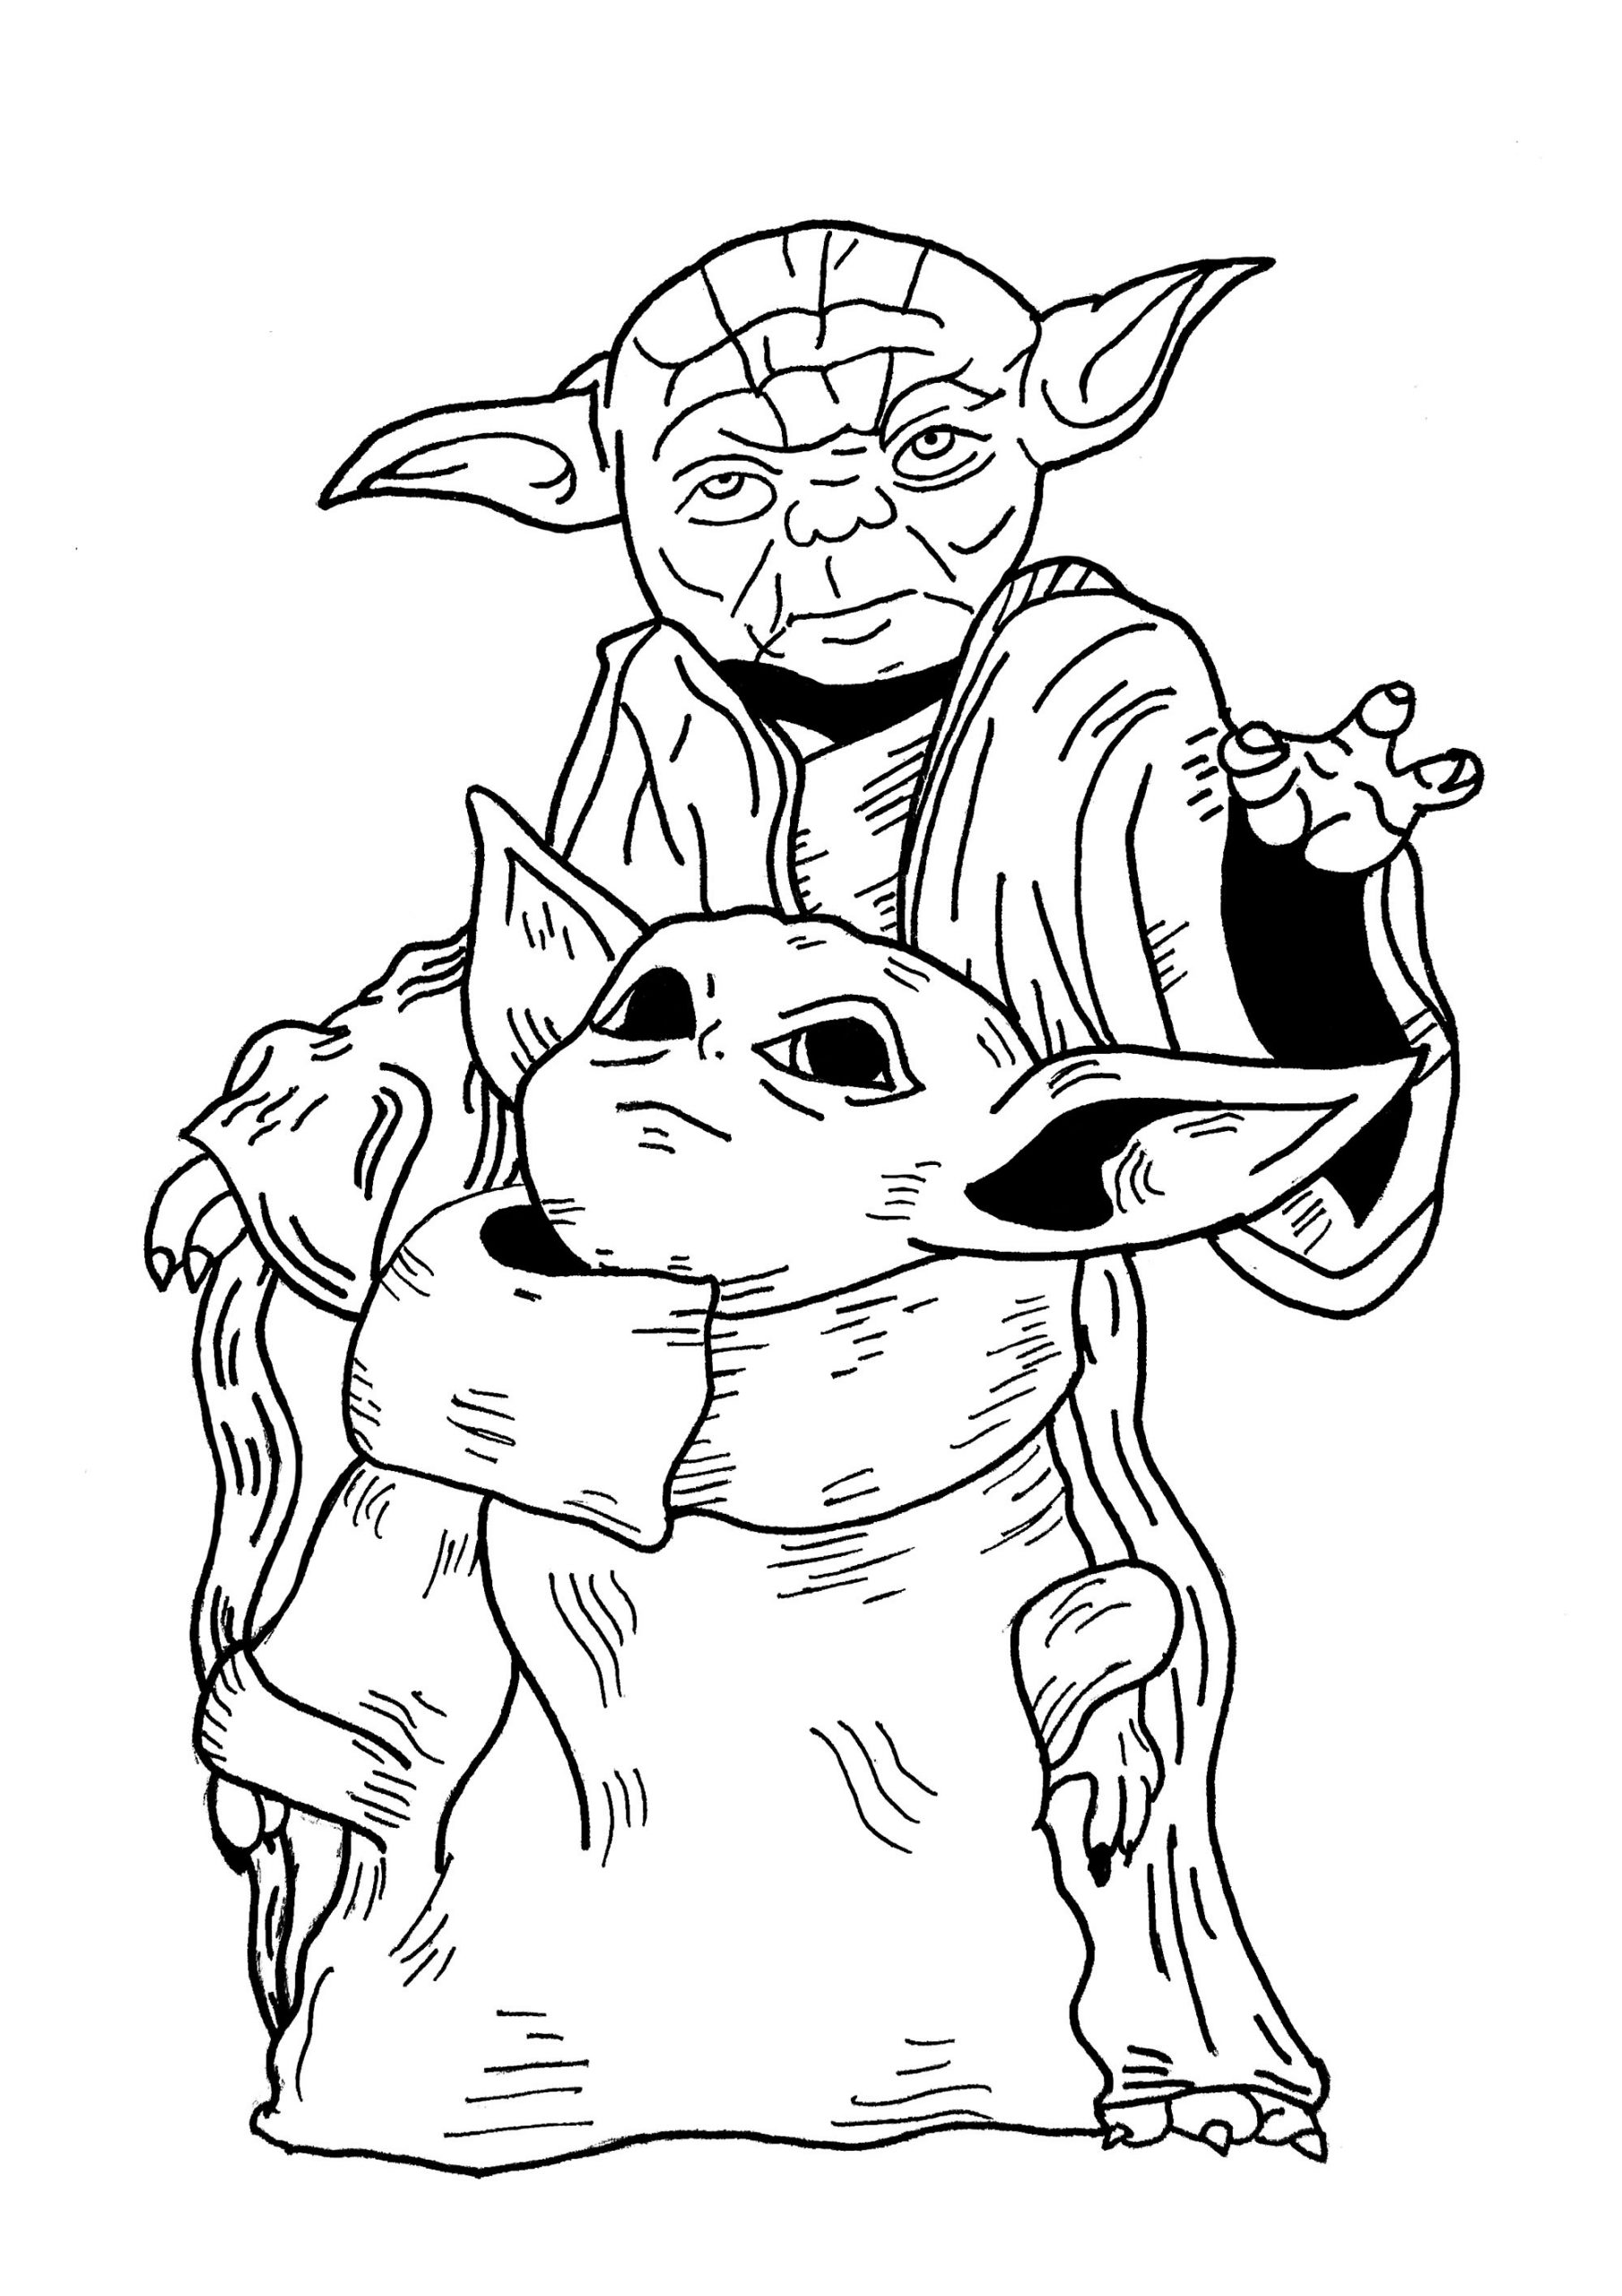 master-yoda-and-baby-yoda-star-wars-coloring-pages-small-yet-powerful-jedi-trainer-of-jedi-order